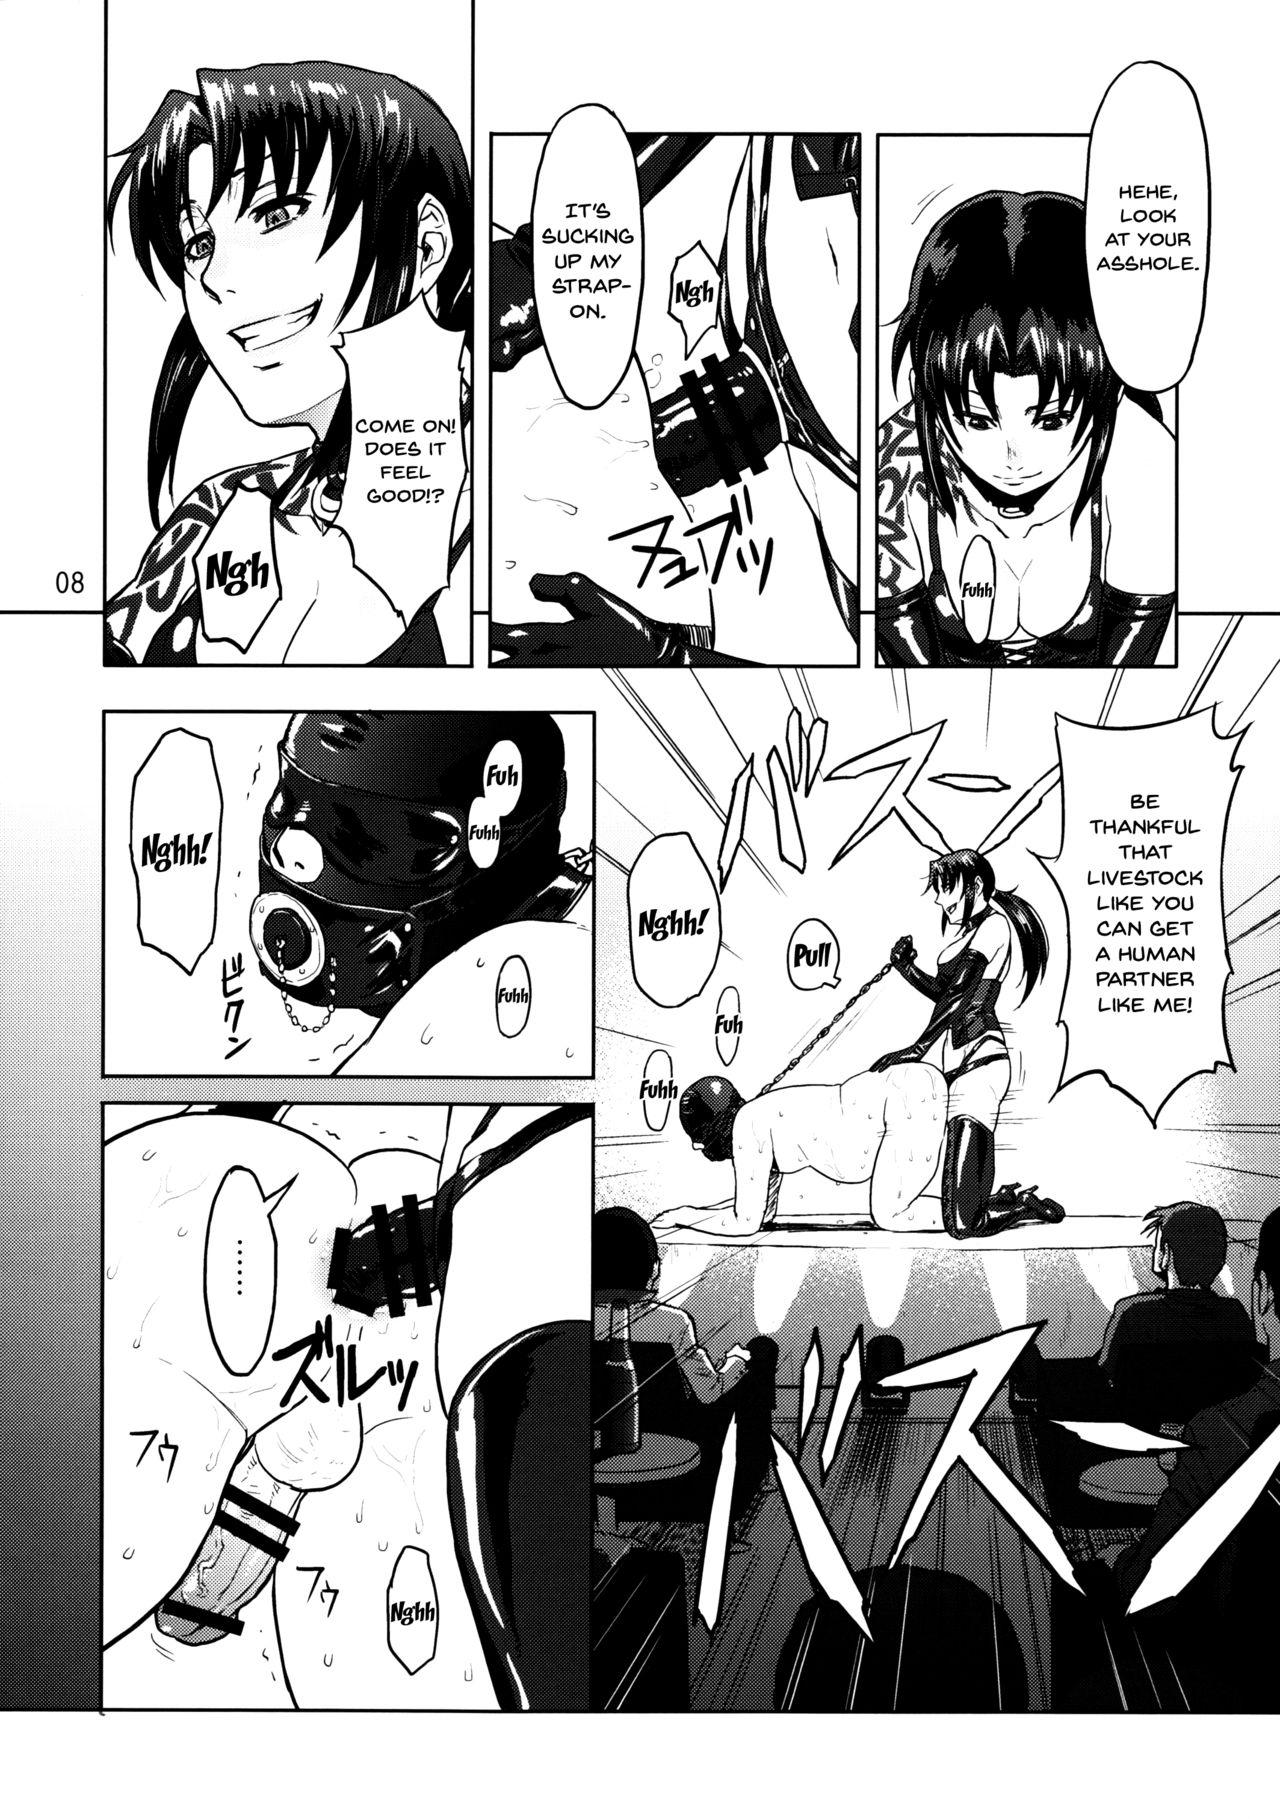 Gay 3some Dressing Room - Black lagoon Foot - Page 8